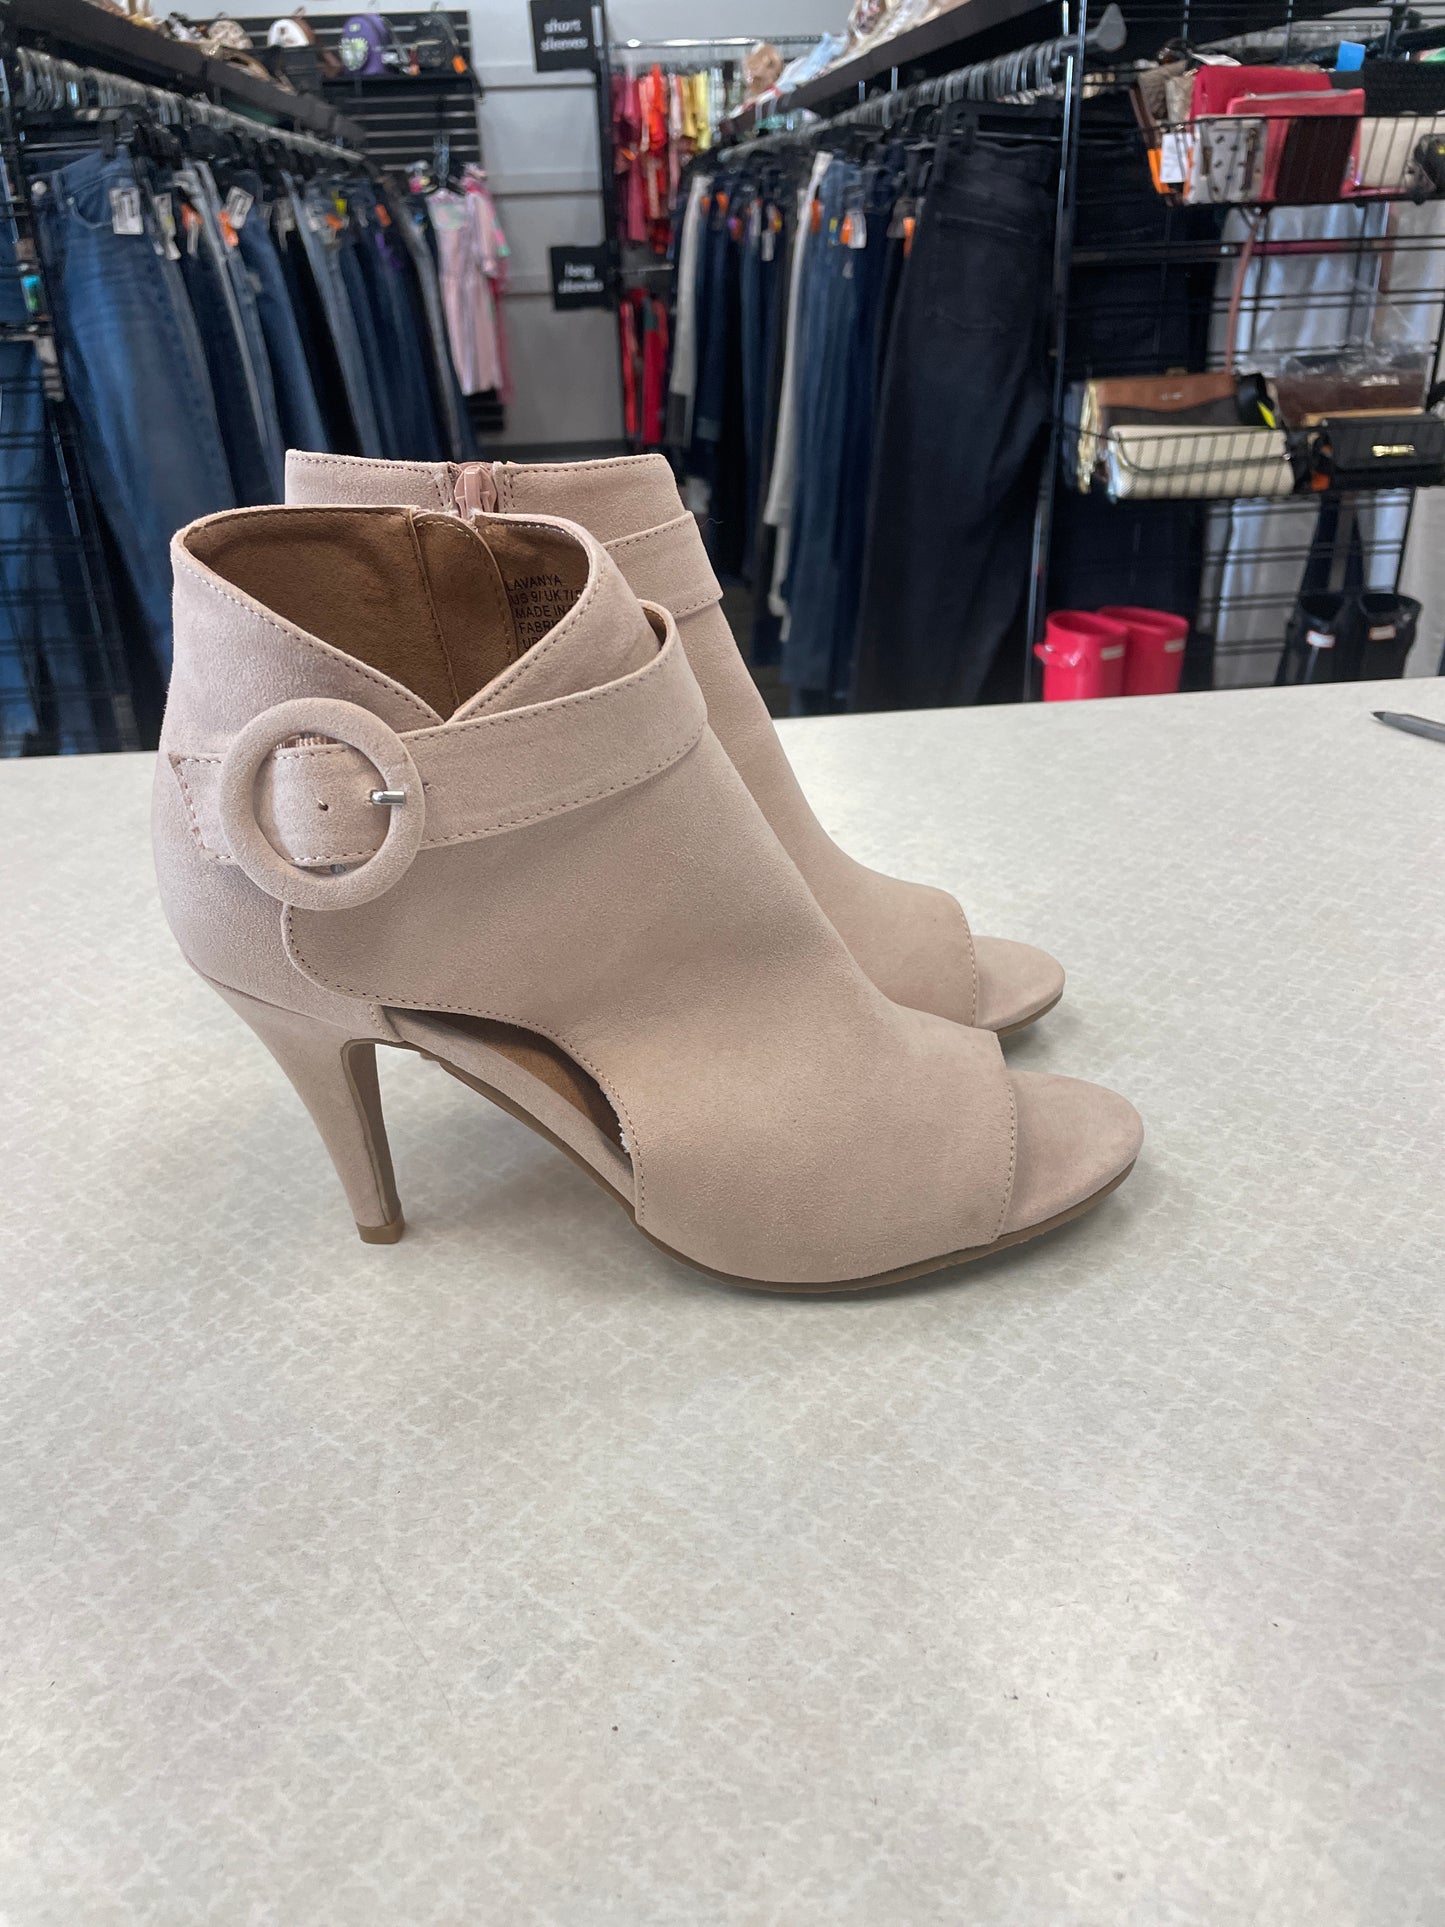 Boots Ankle Heels By Justfab  Size: 9